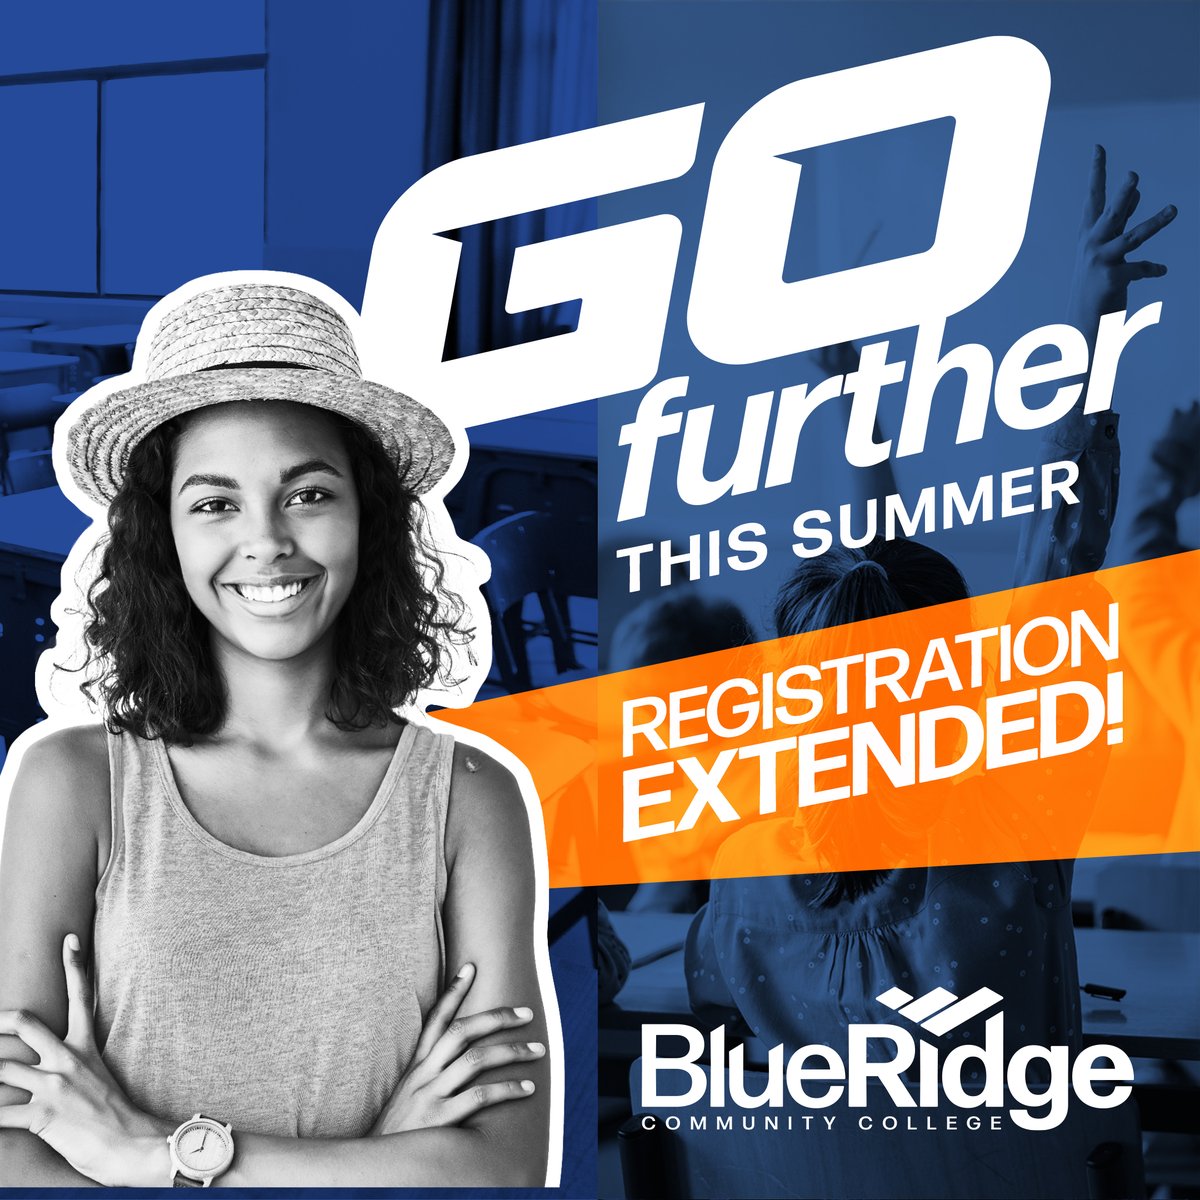 Summer semester enrollment has been extended! Classes start in three days on May 20.We still have some open seats, and we're taking applications now at blueridge.edu/admissions.

#EducationElevated #GoFurther #WNC #828IsGreat #Enroll #HigherEd